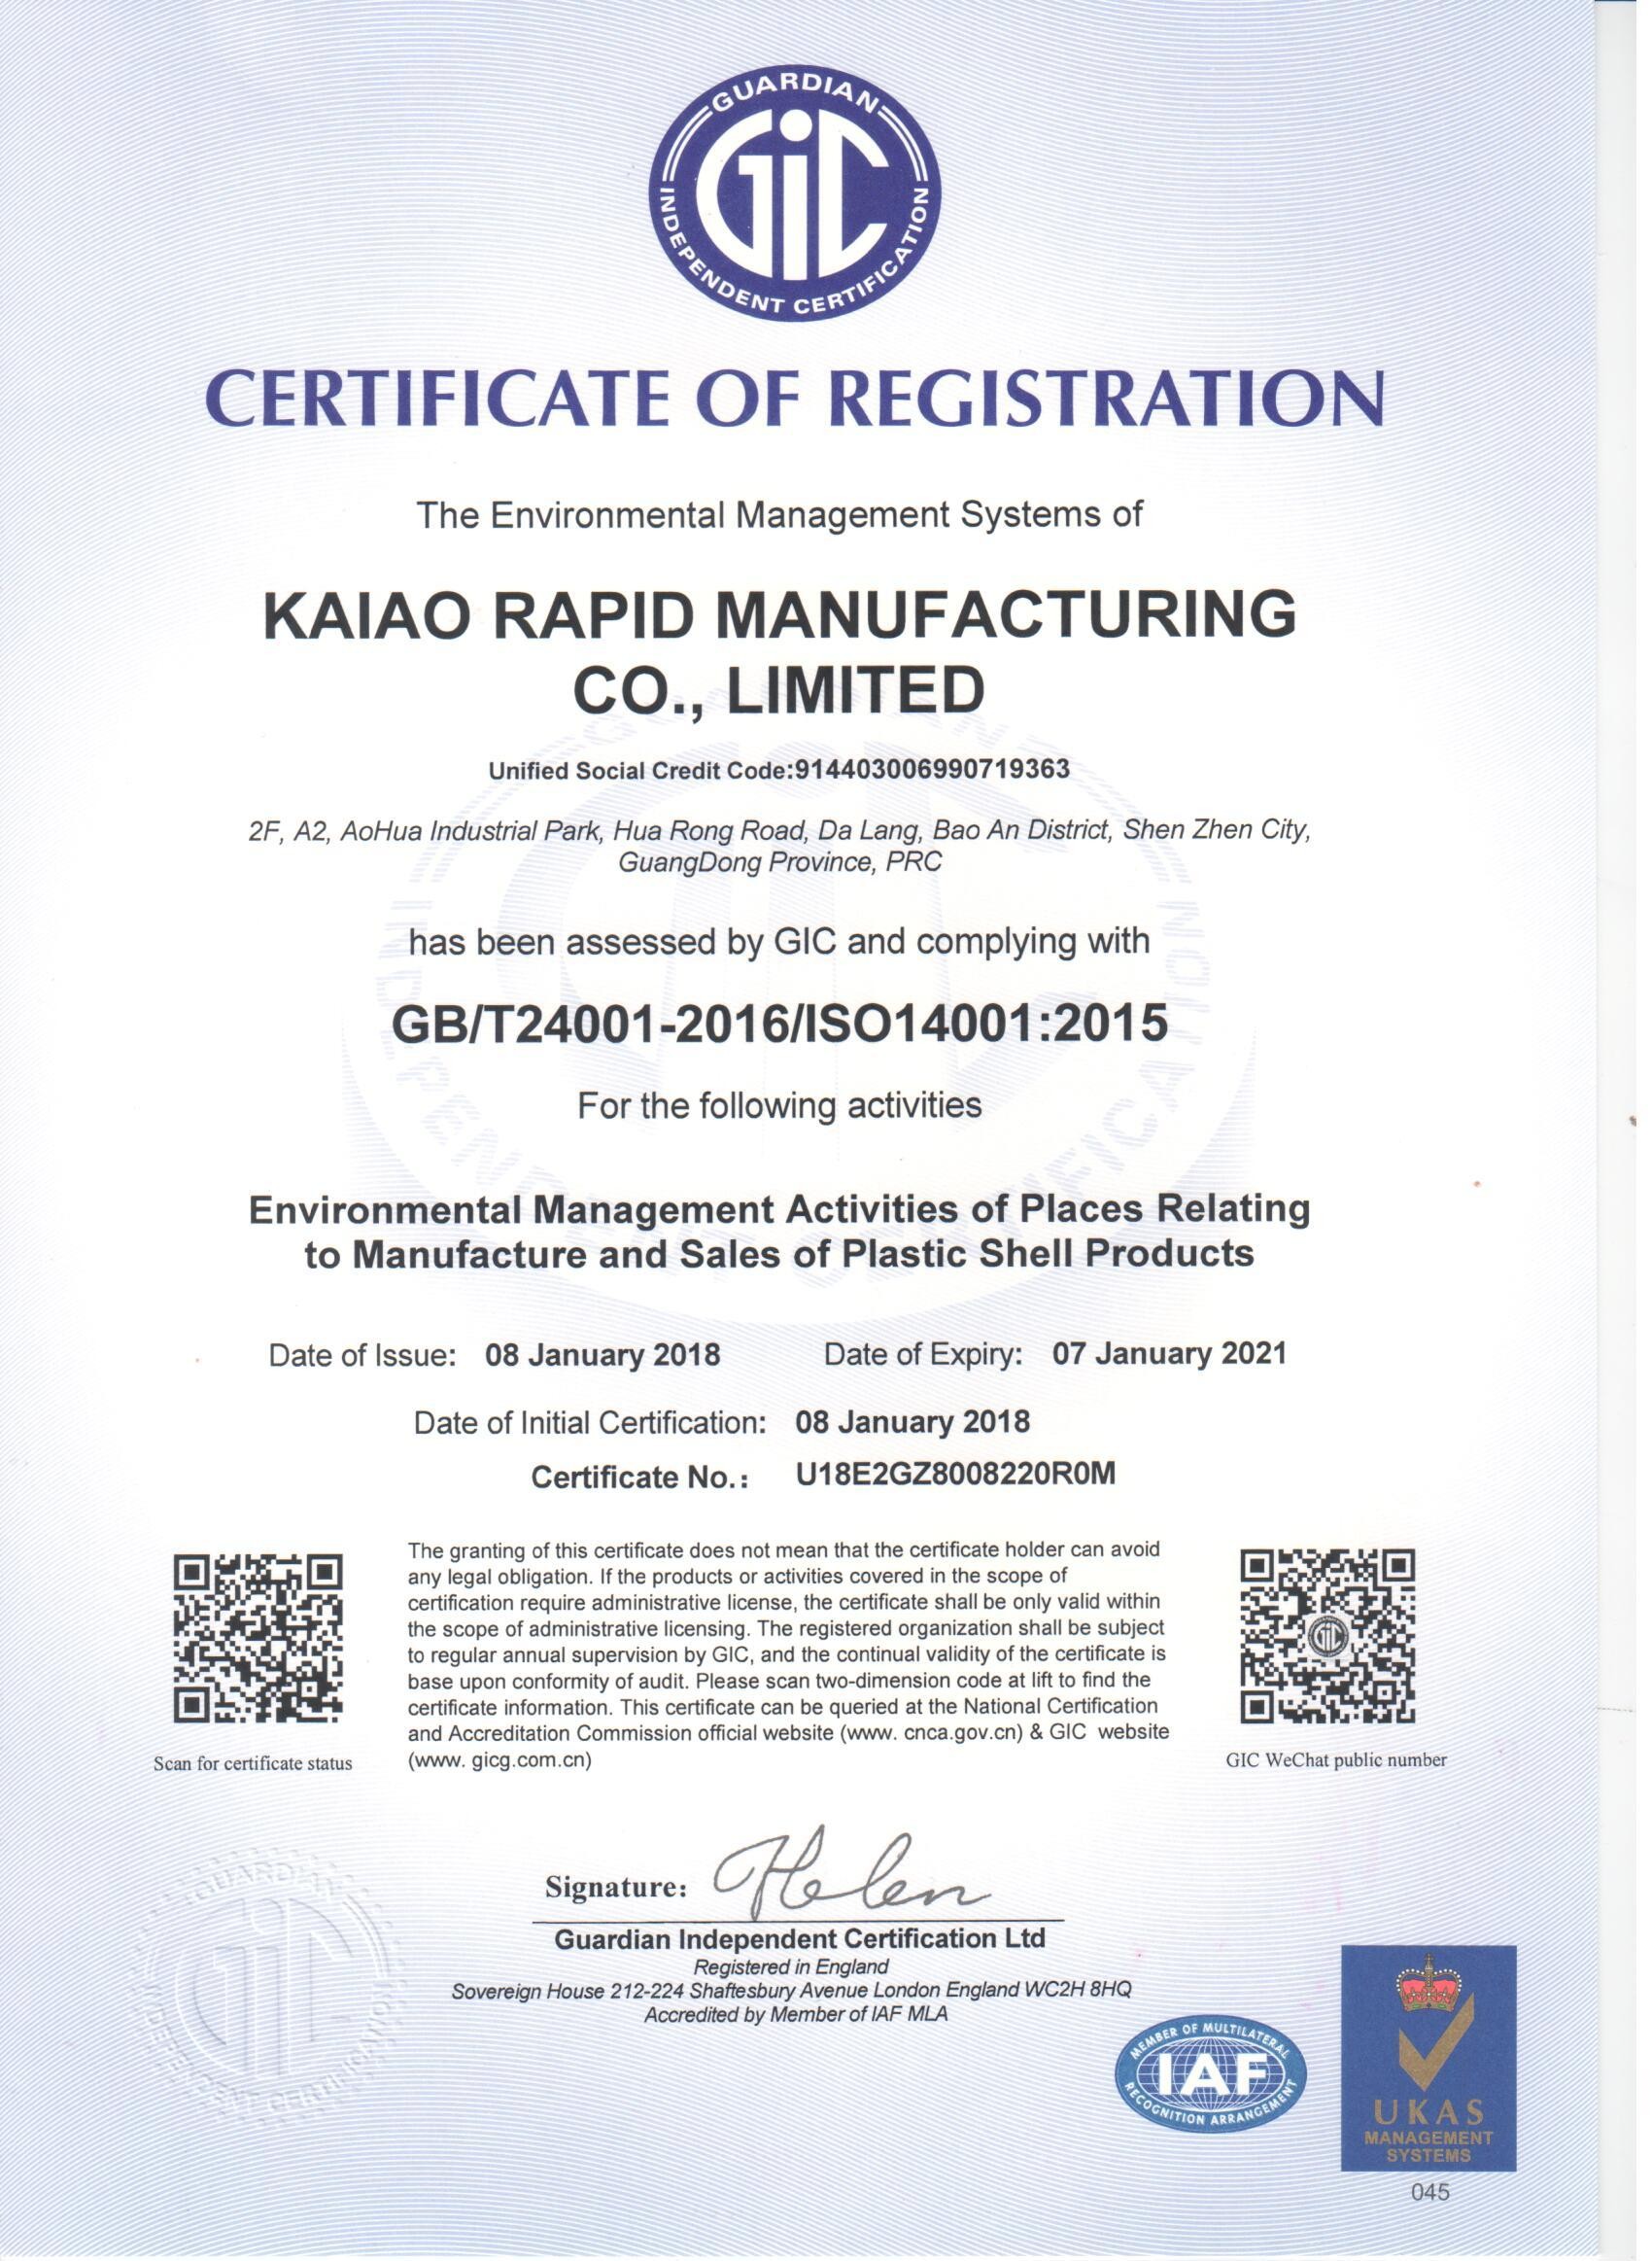 KAIAO RAPID MANUFACTURING CO., LTD Certifications